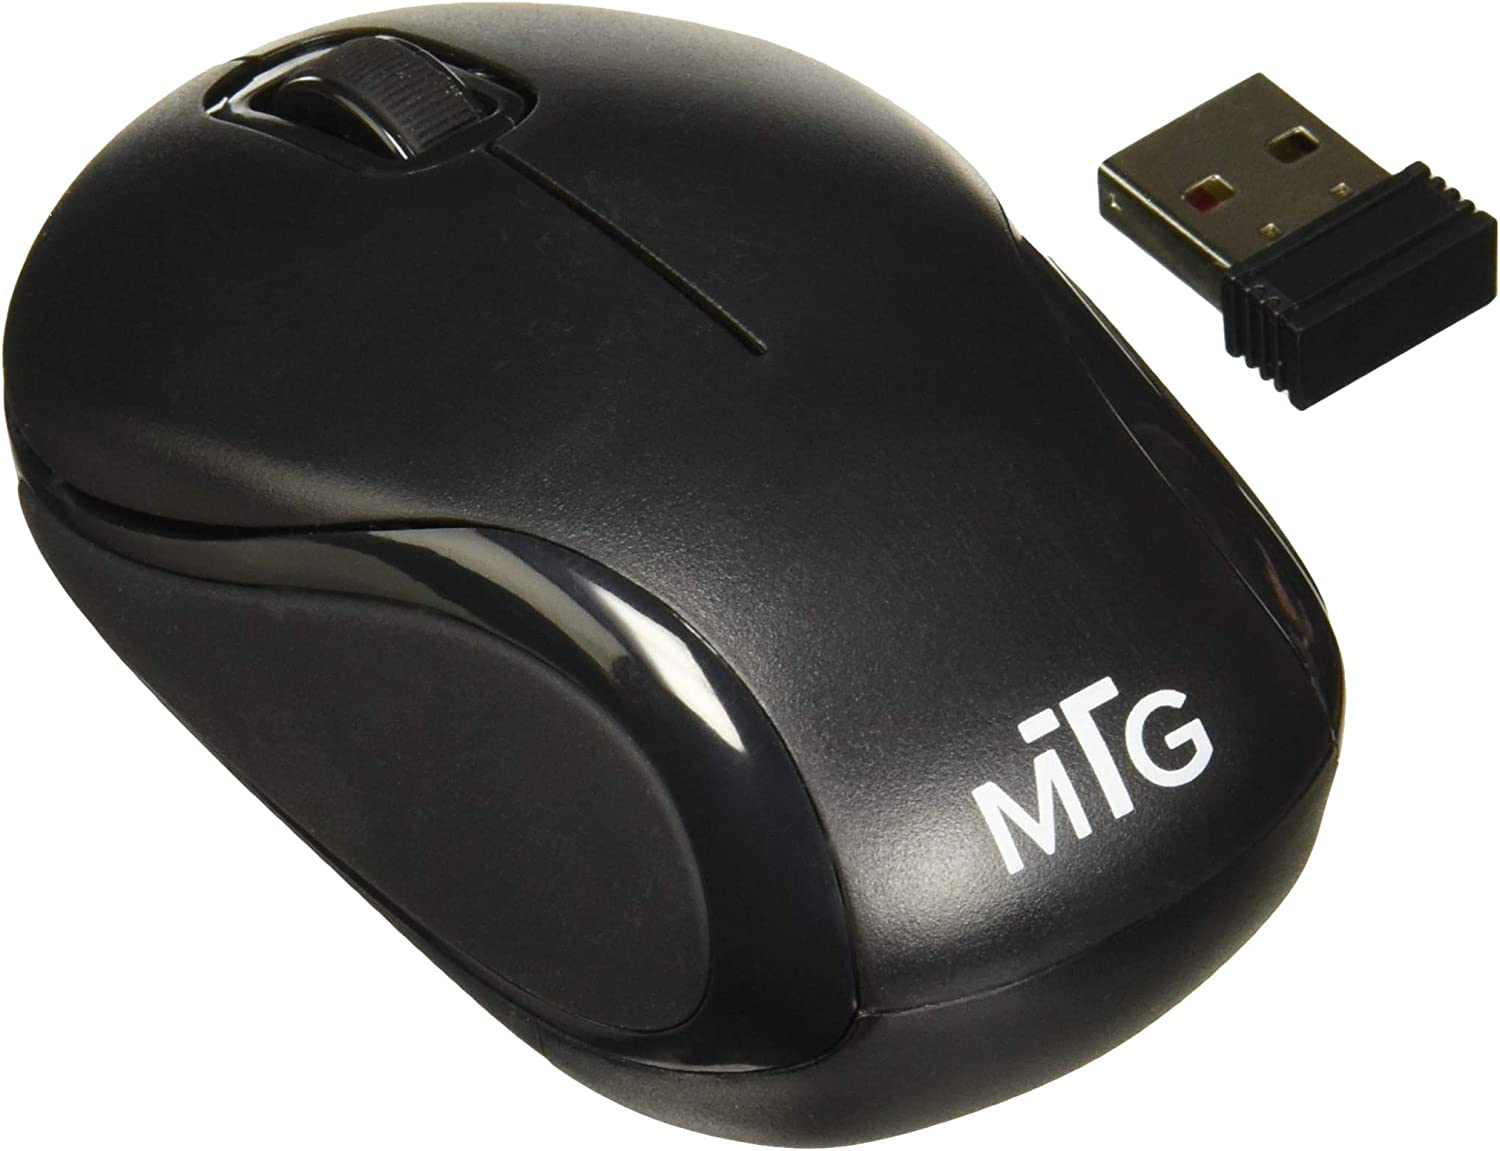 MOUSE MTG BY TARGUS COMPACT WIRELESS BLACK (AMW841LP)